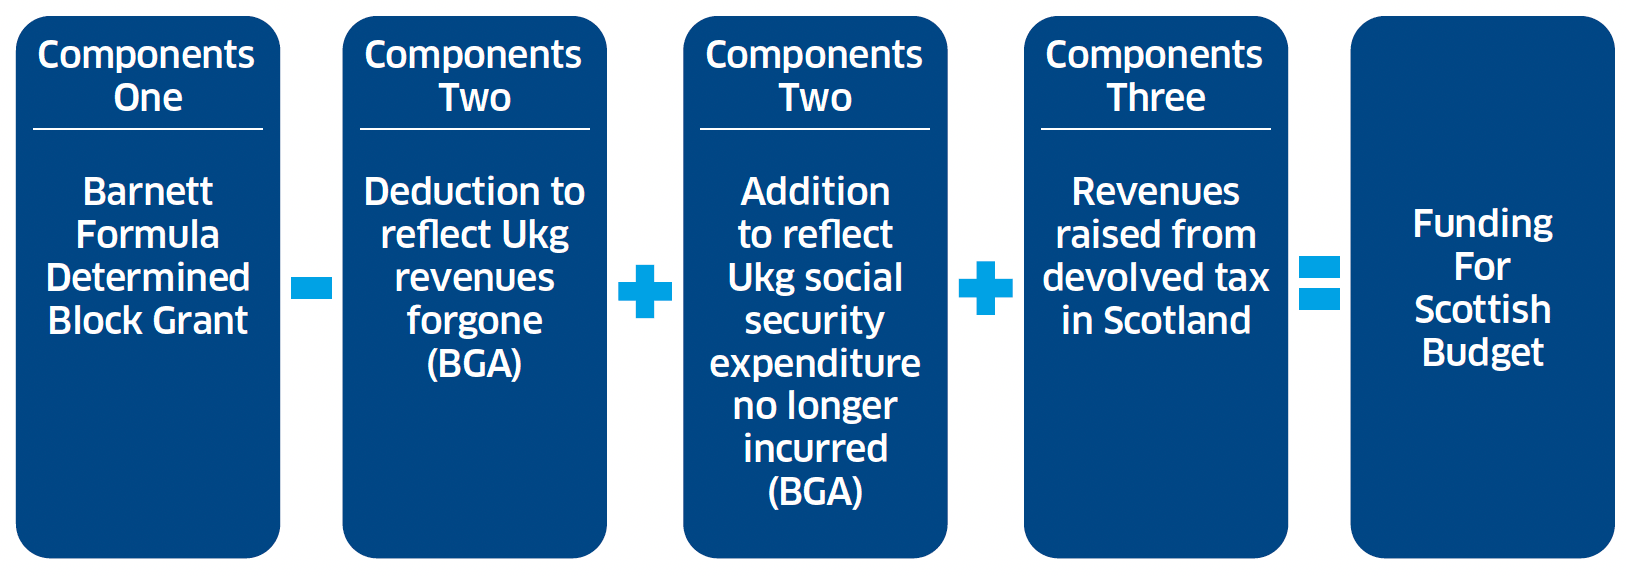 This figure sets out the three components that comprise the total funding of the Scottish Budget each year. Component one is the Block Grant, which is determined by the Barnett formula. Component two adjusts the Block Grant to take account of revenues foregone by the UK Government through devolved taxes and to reflect expenditure for social security powers. Component three adds revenues generated by devolved and local taxes to the adjusted Block Grant to arrive at the final funding for the Scottish Budget.